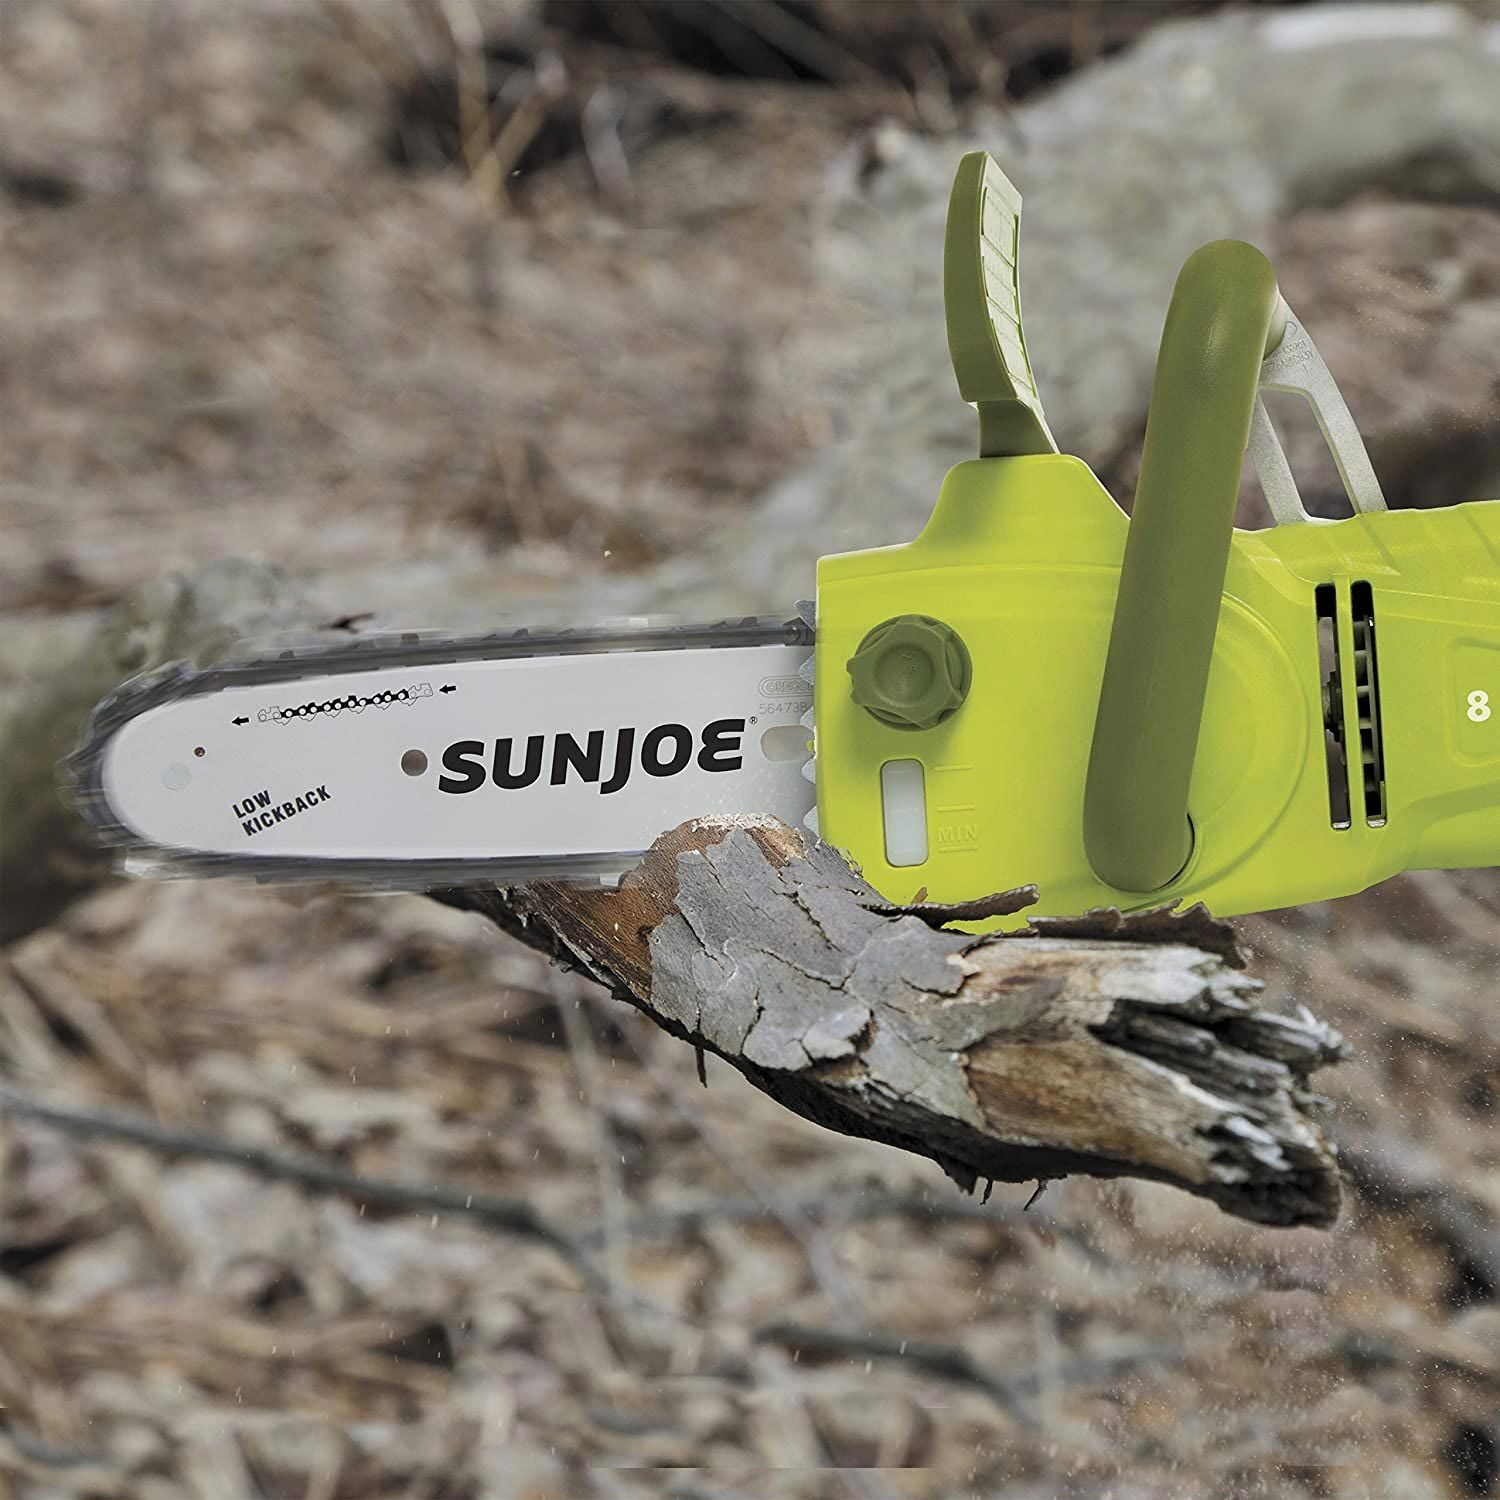 The Saker Mini Chainsaw Is the Best Electric Chainsaw—and It's 50% Off